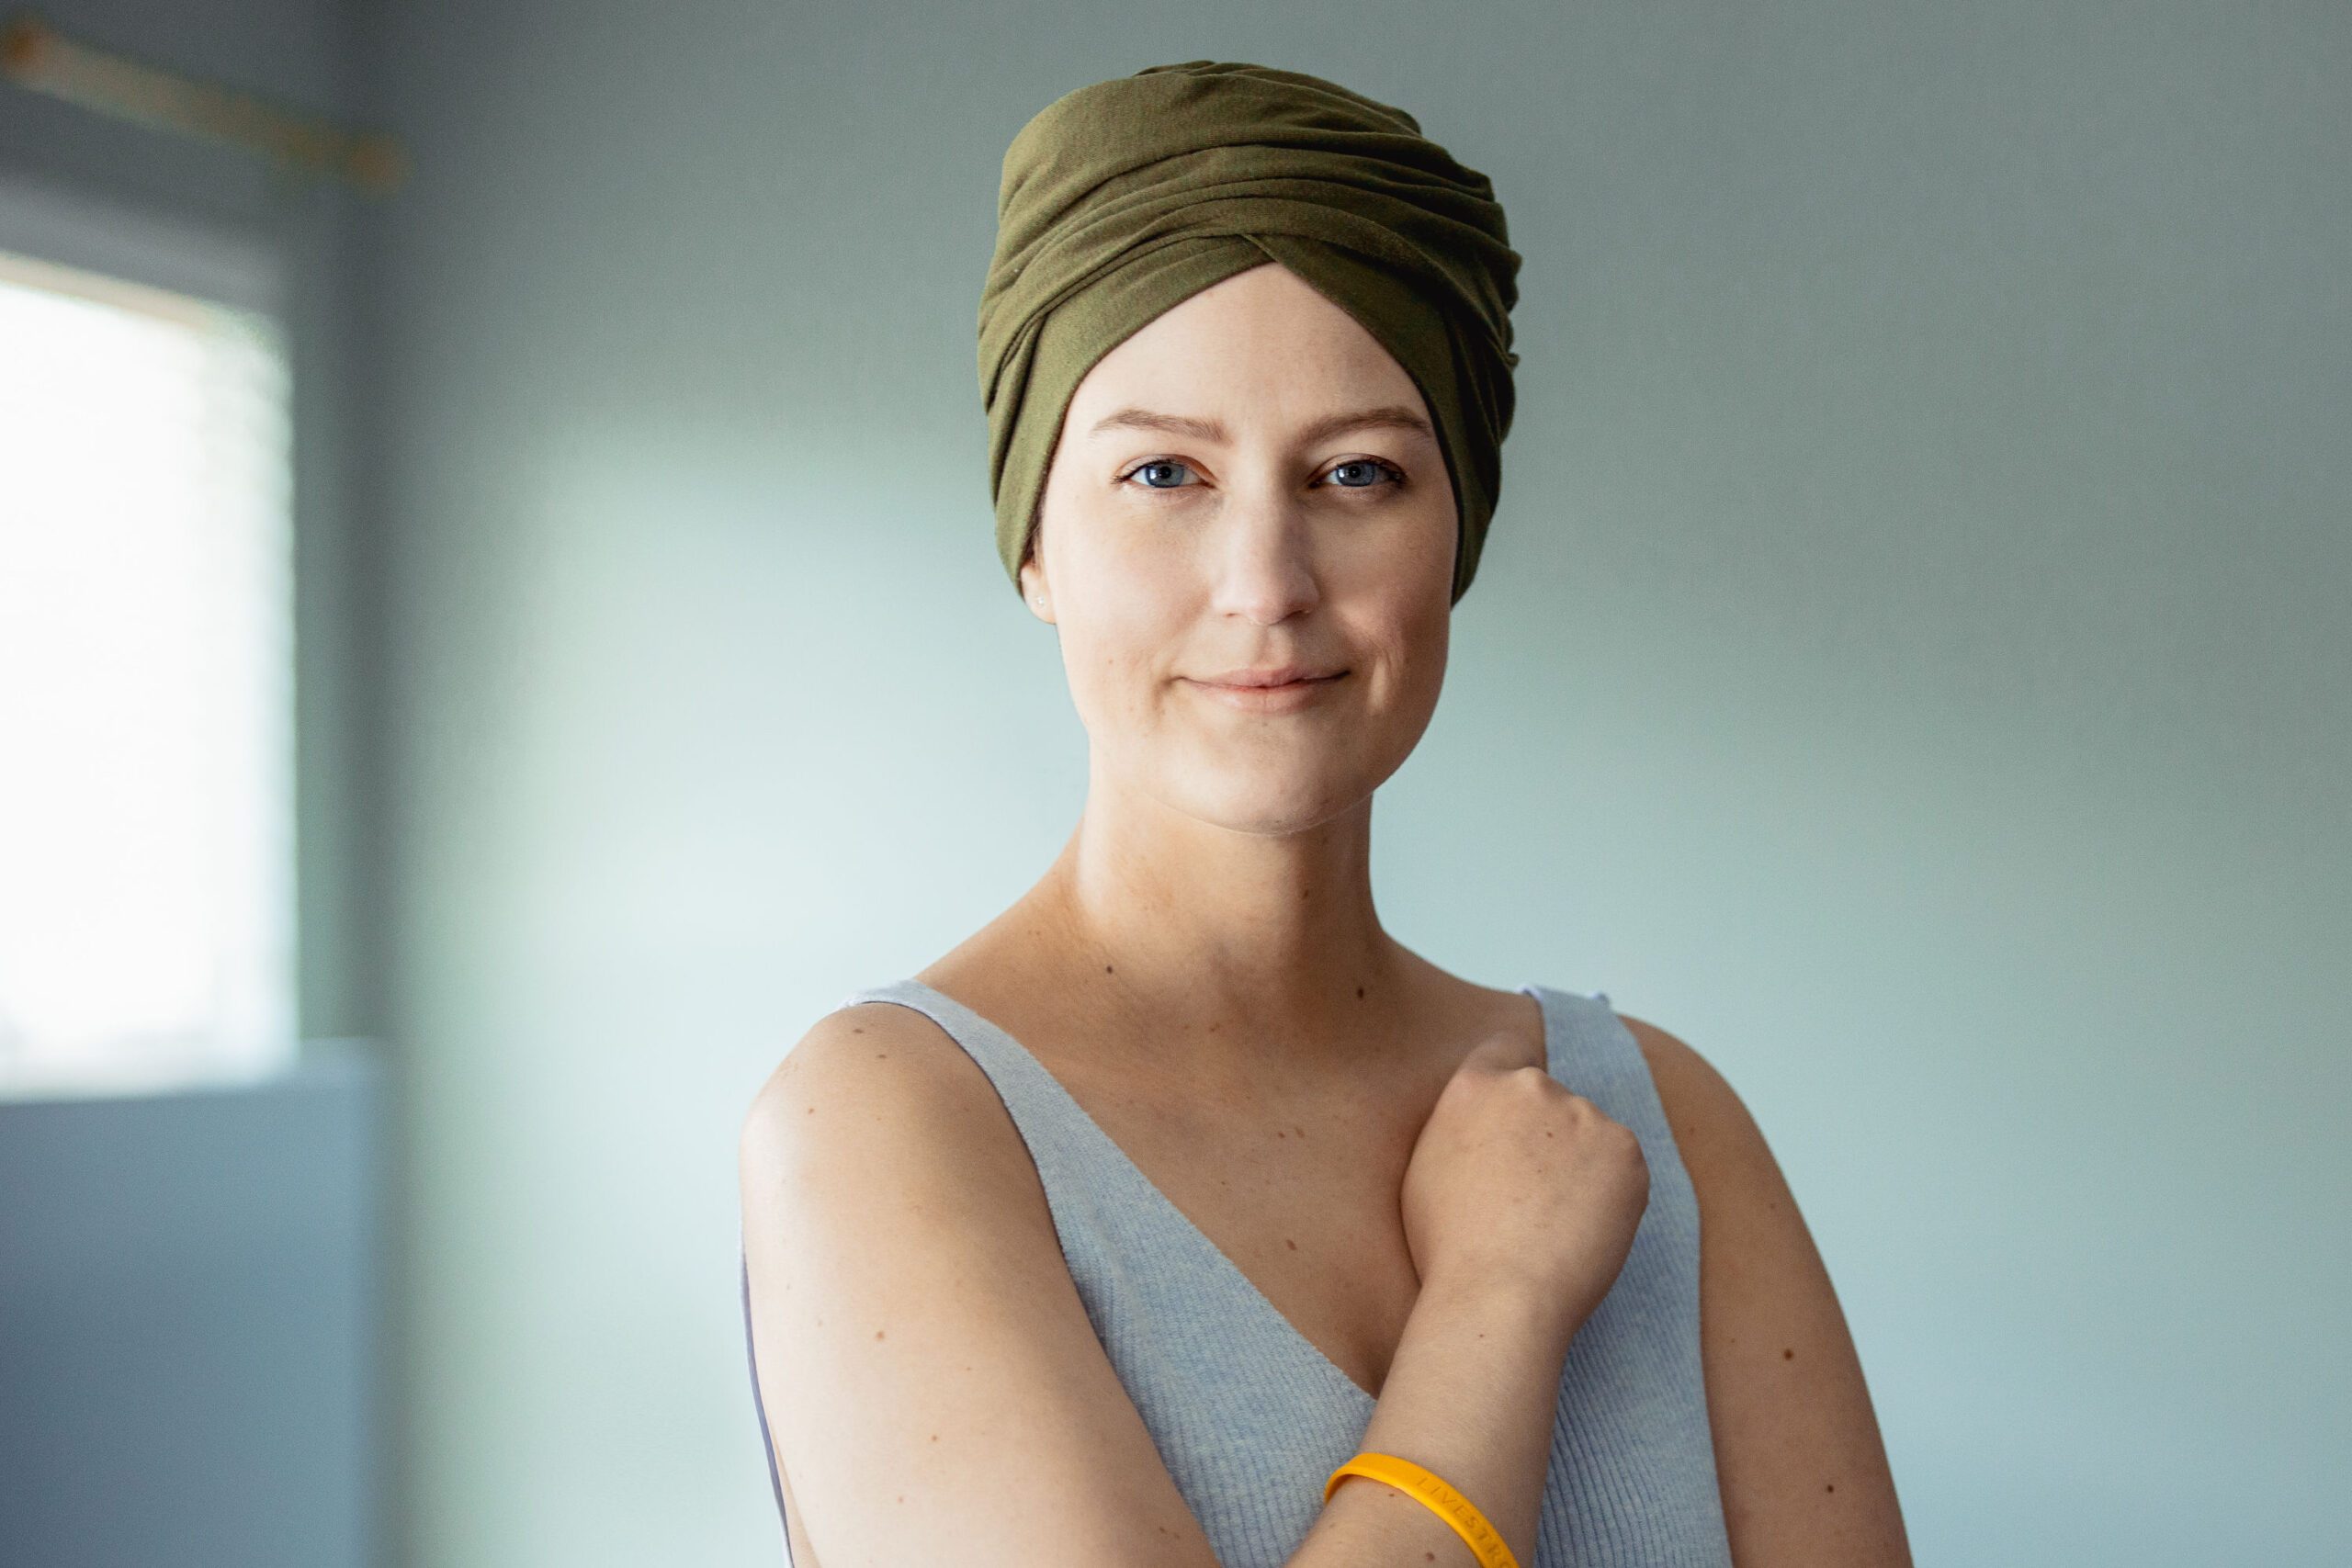 Portrait of a woman cancer survivor wearing a head wrap and Livestrong wristband